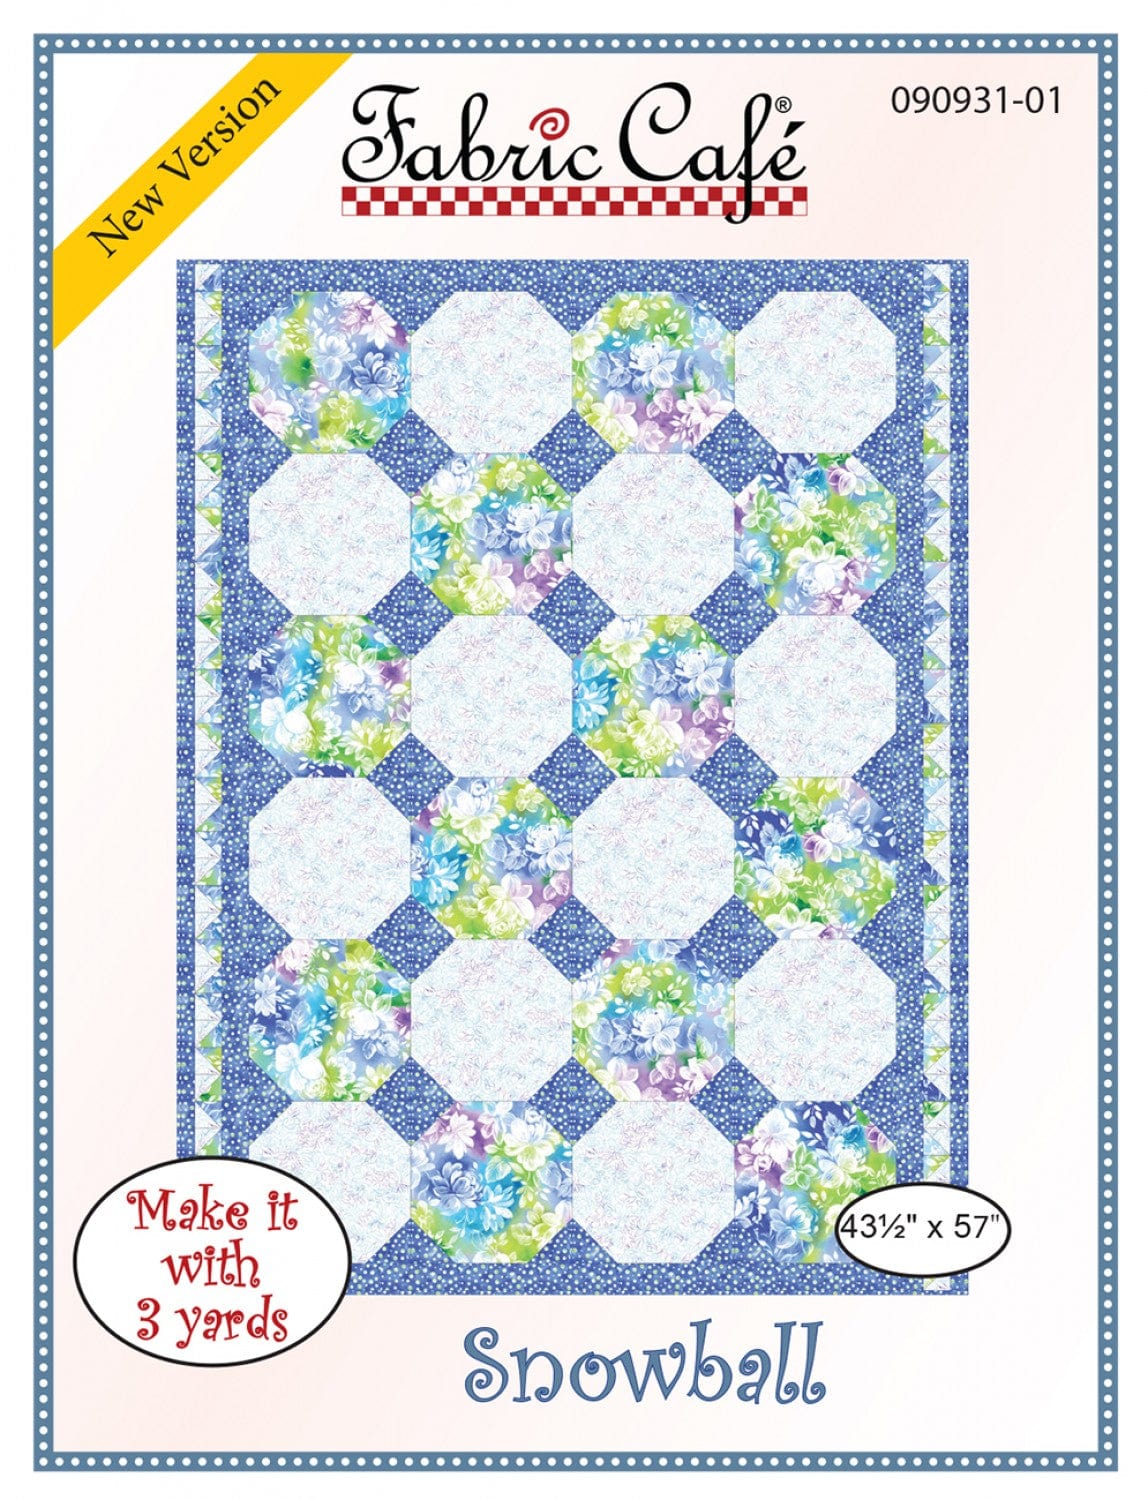 Snowball Pattern - 3-yard Quilt - Fabric Cafe - Norton House Quilting